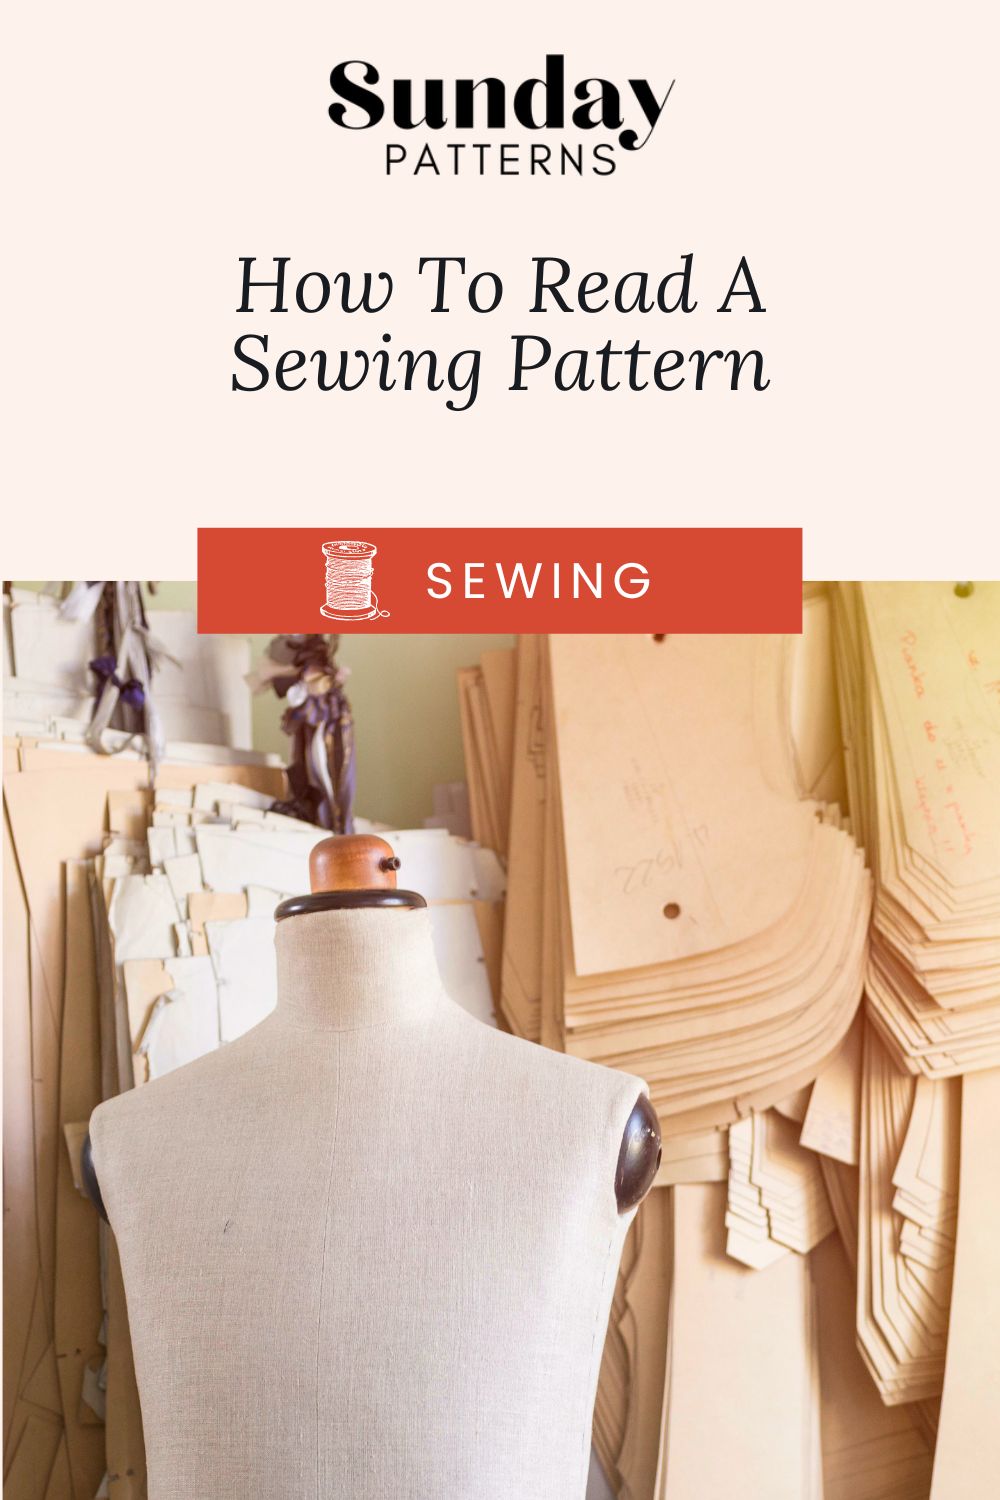 How to read a sewing pattern format